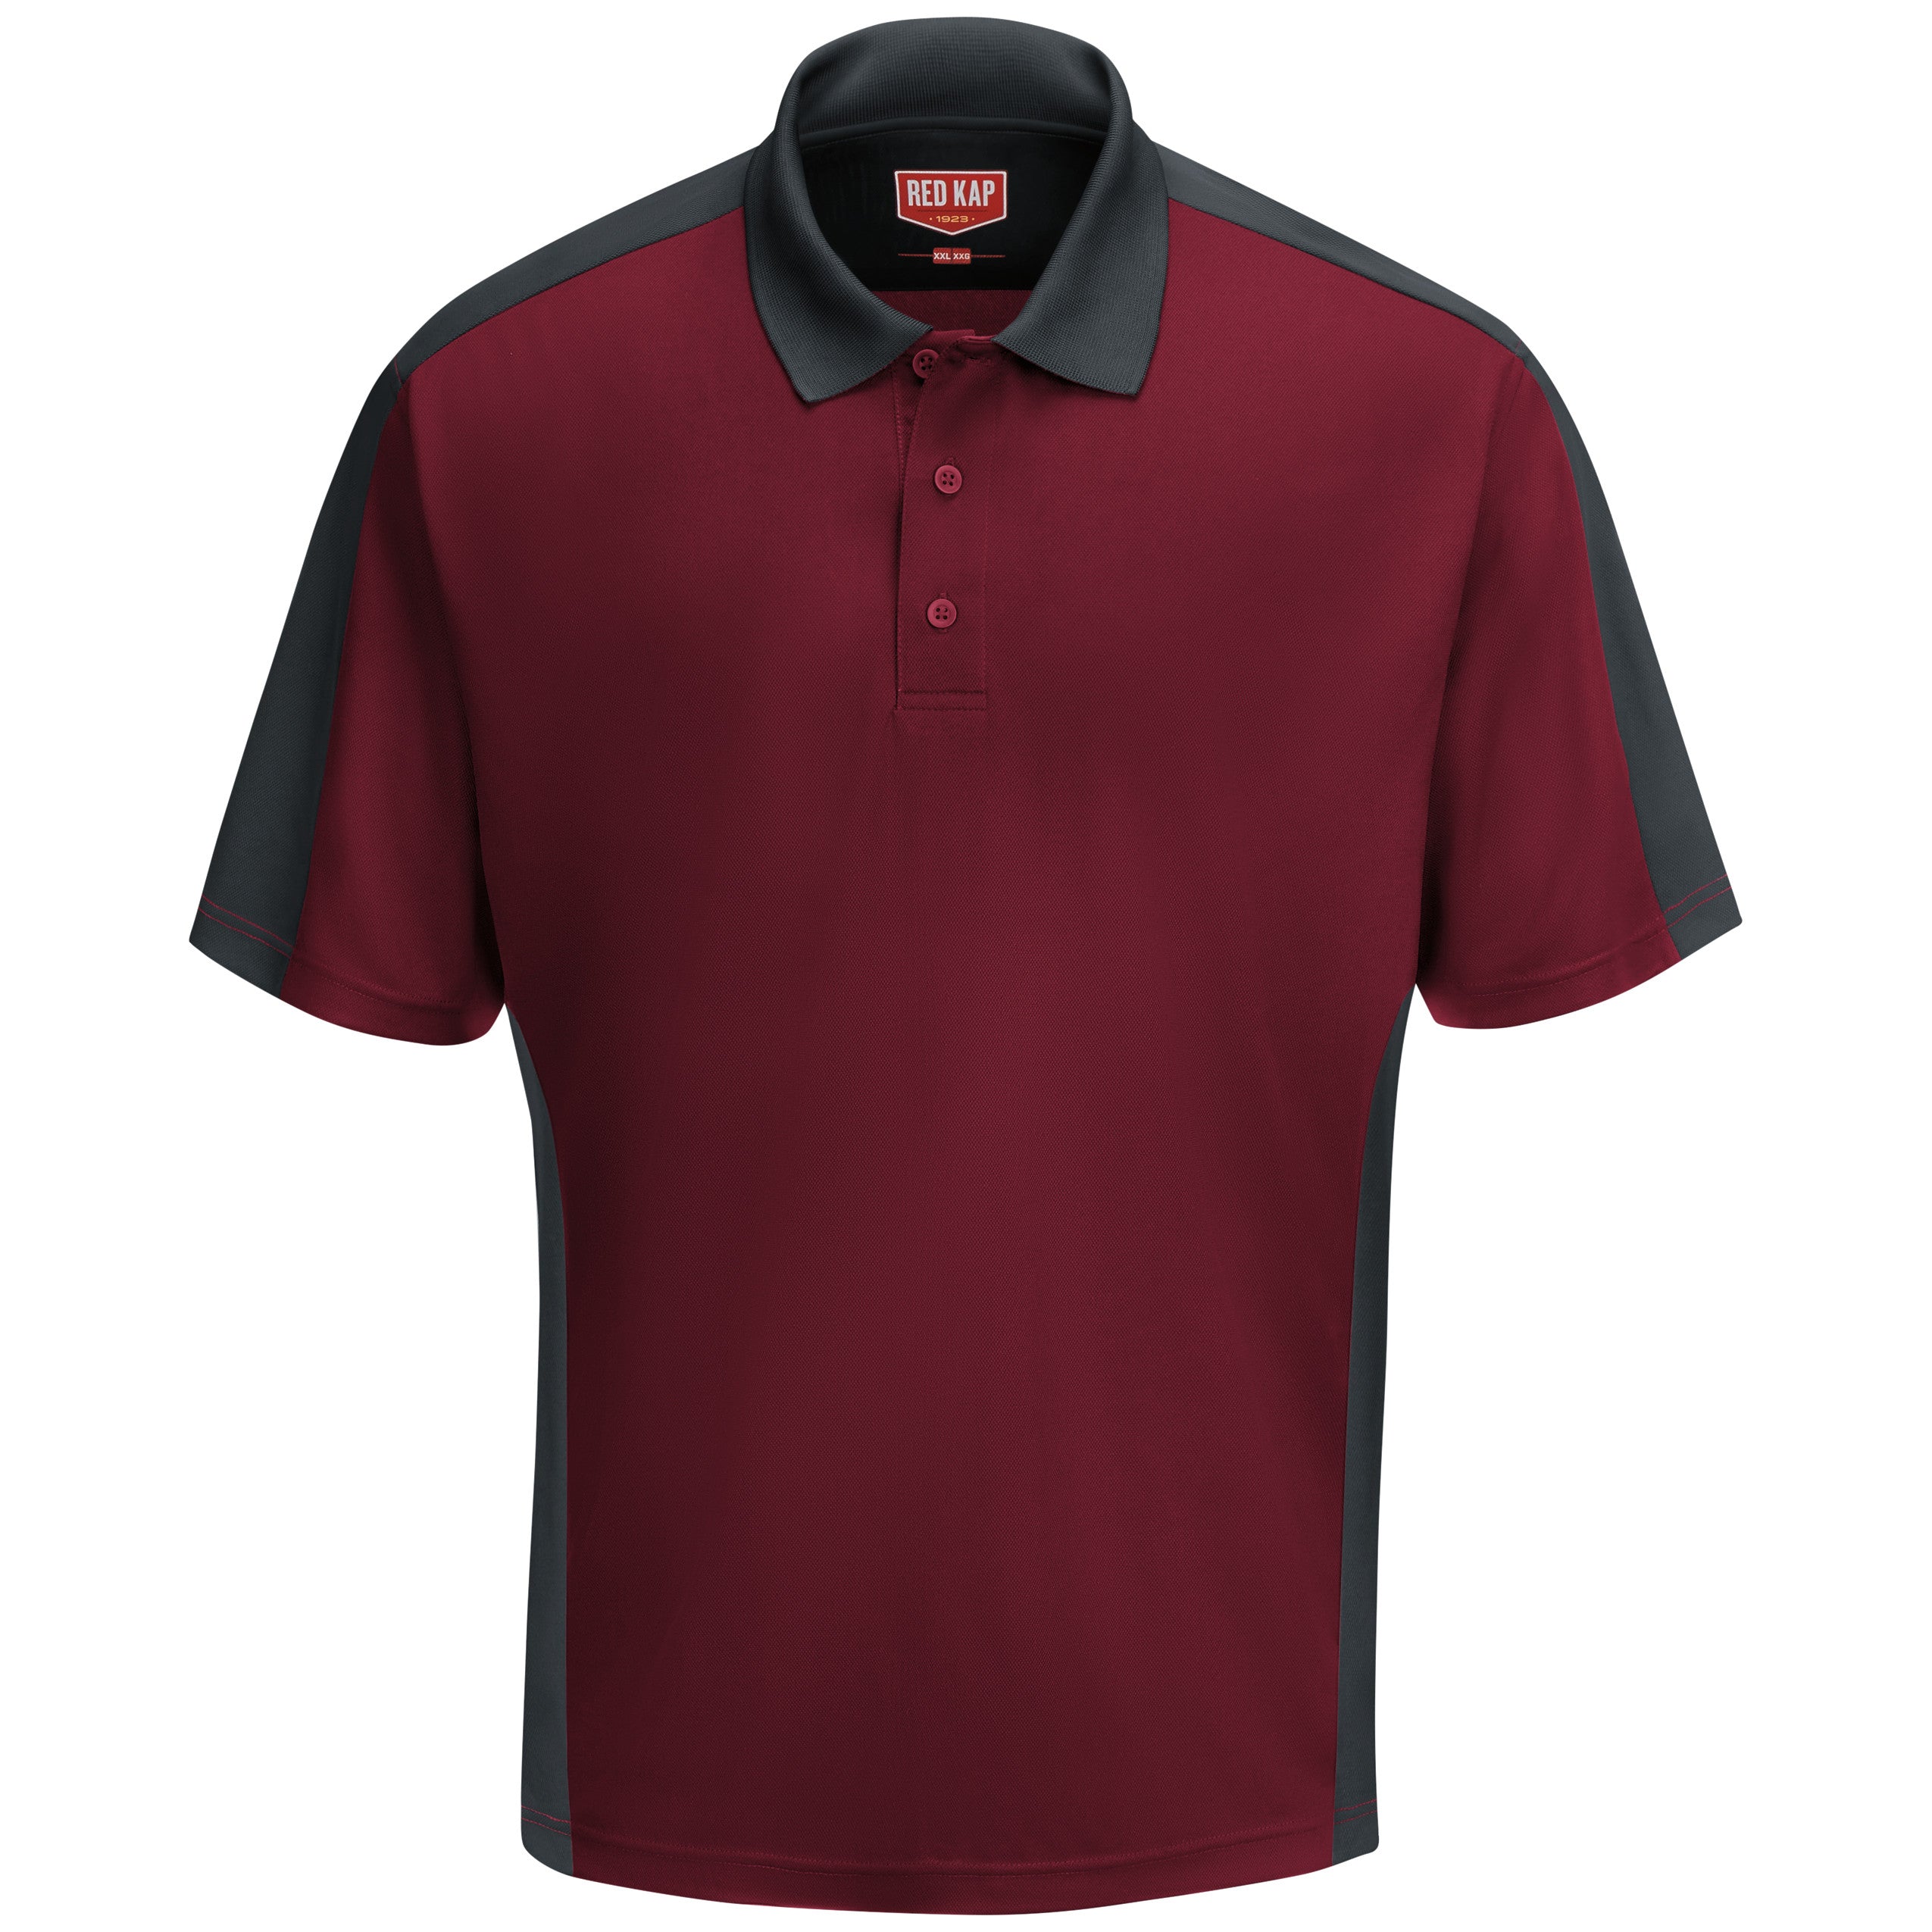 Men's Short Sleeve Performance Knit Two-Tone Polo SK54 - Burgundy/Charcoal-eSafety Supplies, Inc